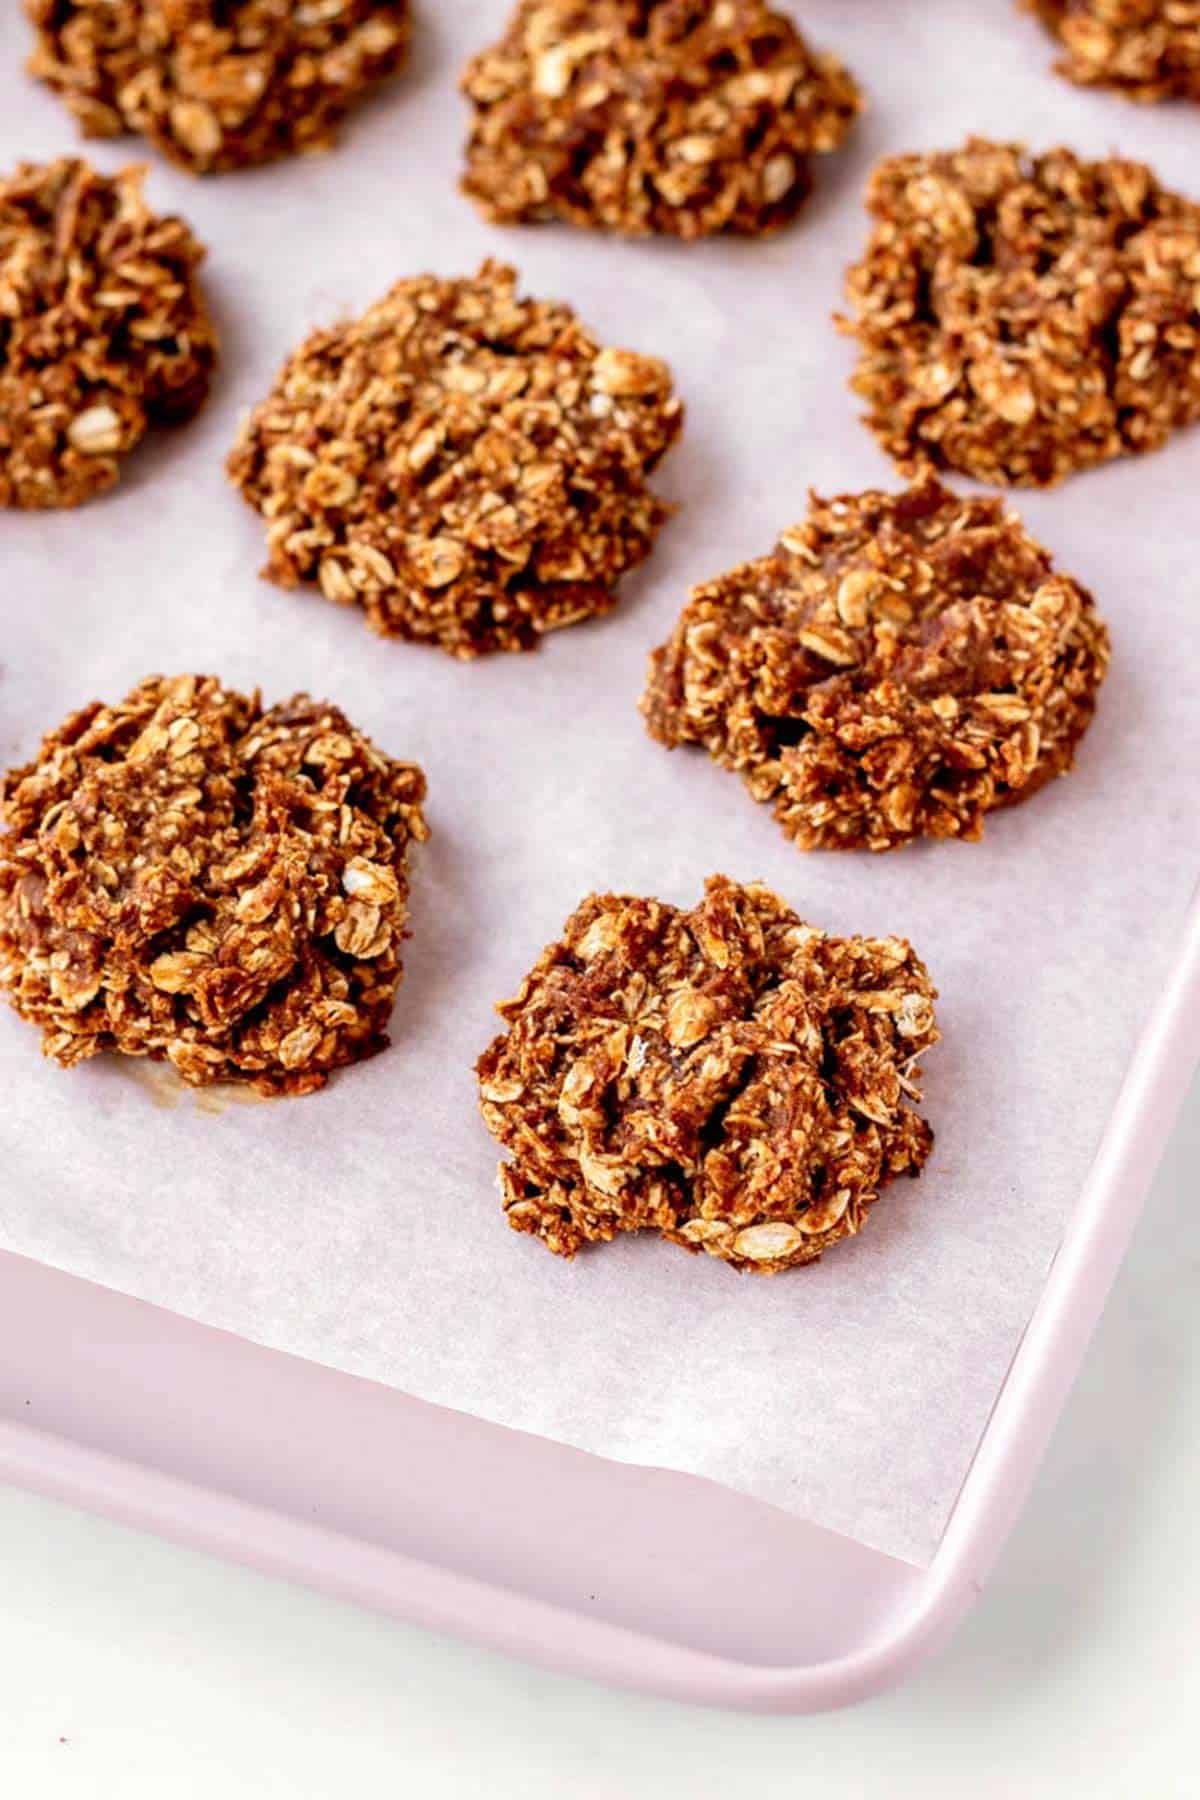 An up close image of the applesauce oatmeal cookies on a pink baking sheet.